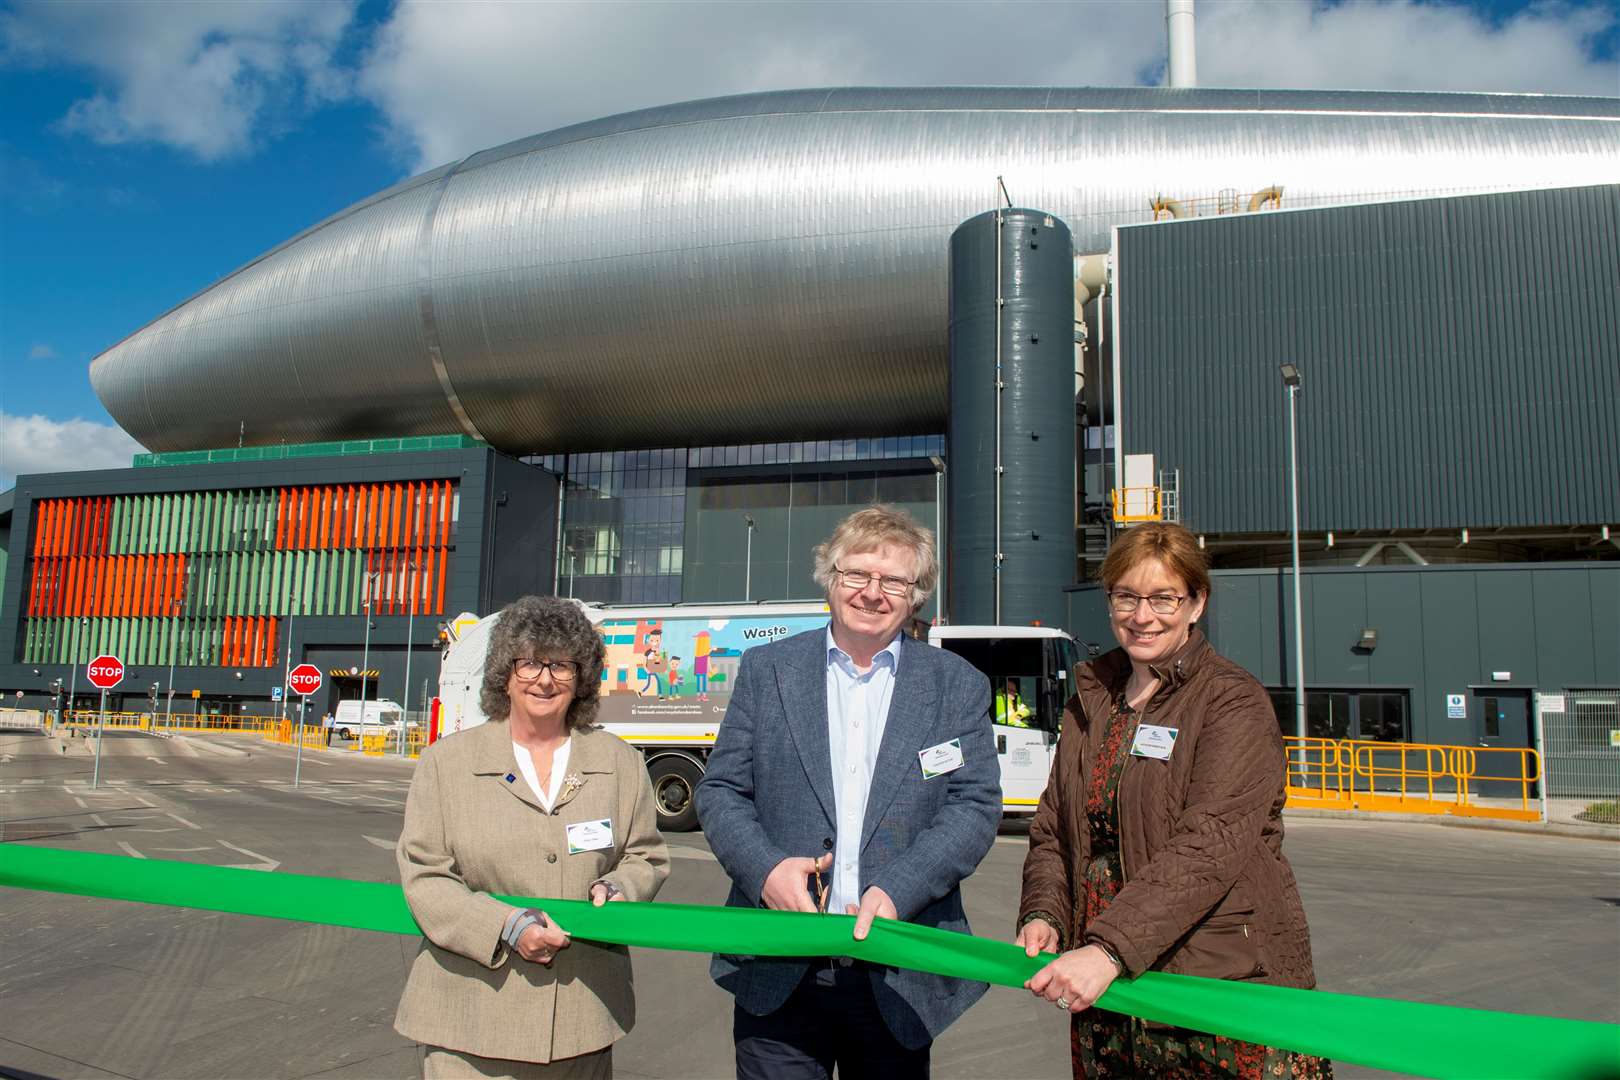 Councillor Gillian Owen Leader of Aberdeenshire Council (left) with Councillor Ian Yuill, Co Leader Aberdeen City Council and Kathleen Robertson, Leader Moray Council at the opening of the waste centre.